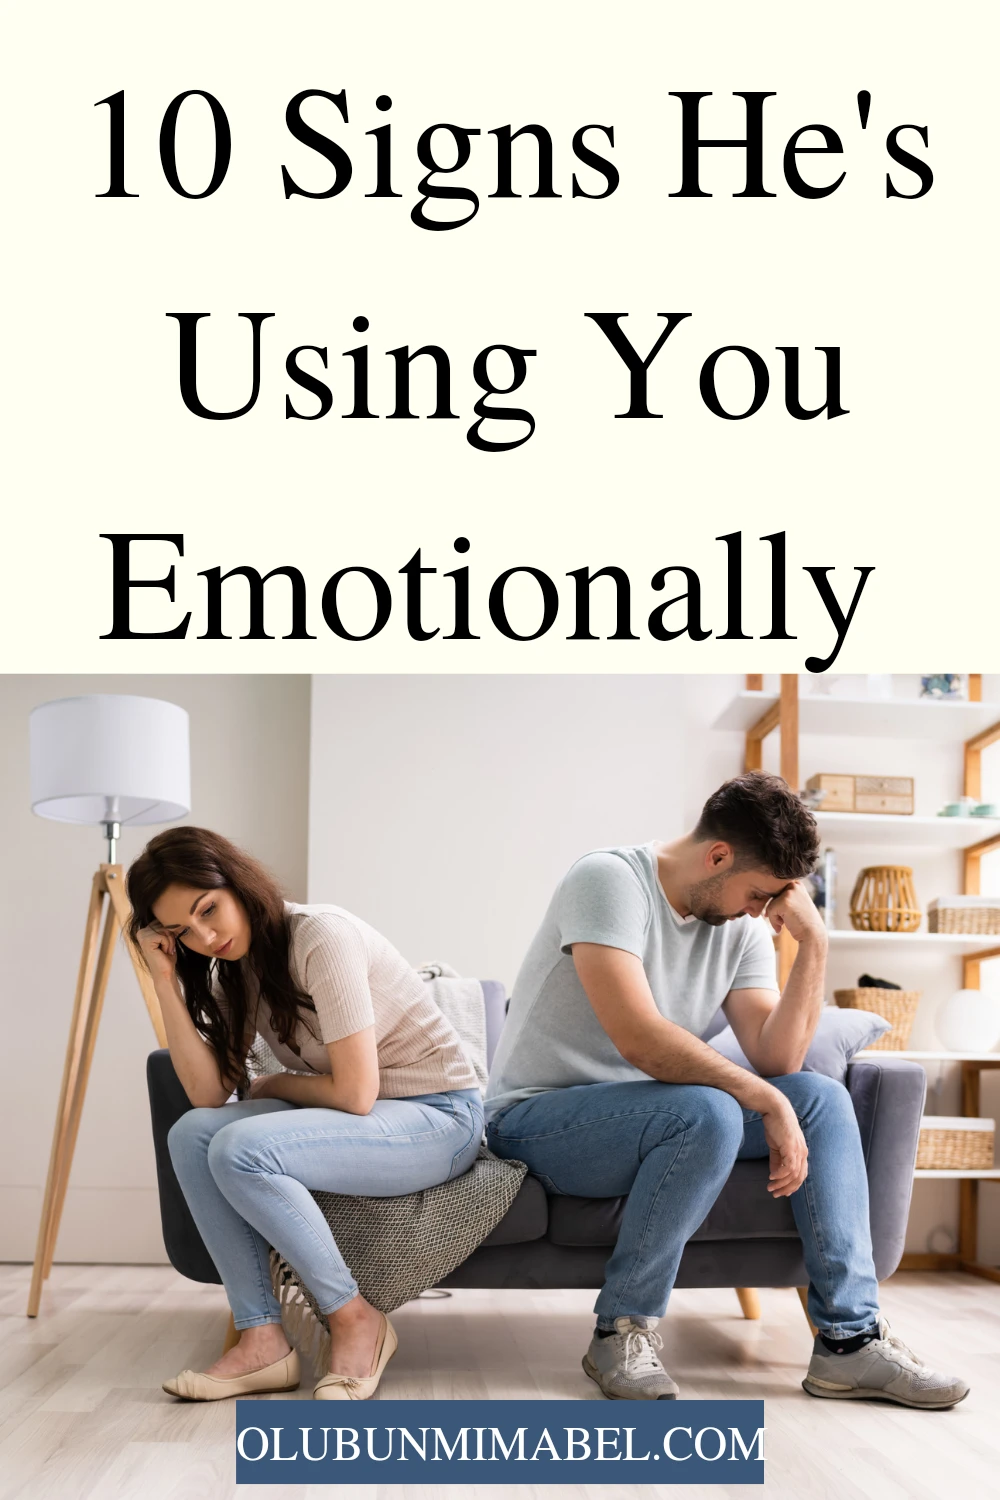 Signs He is Emotionally Using You